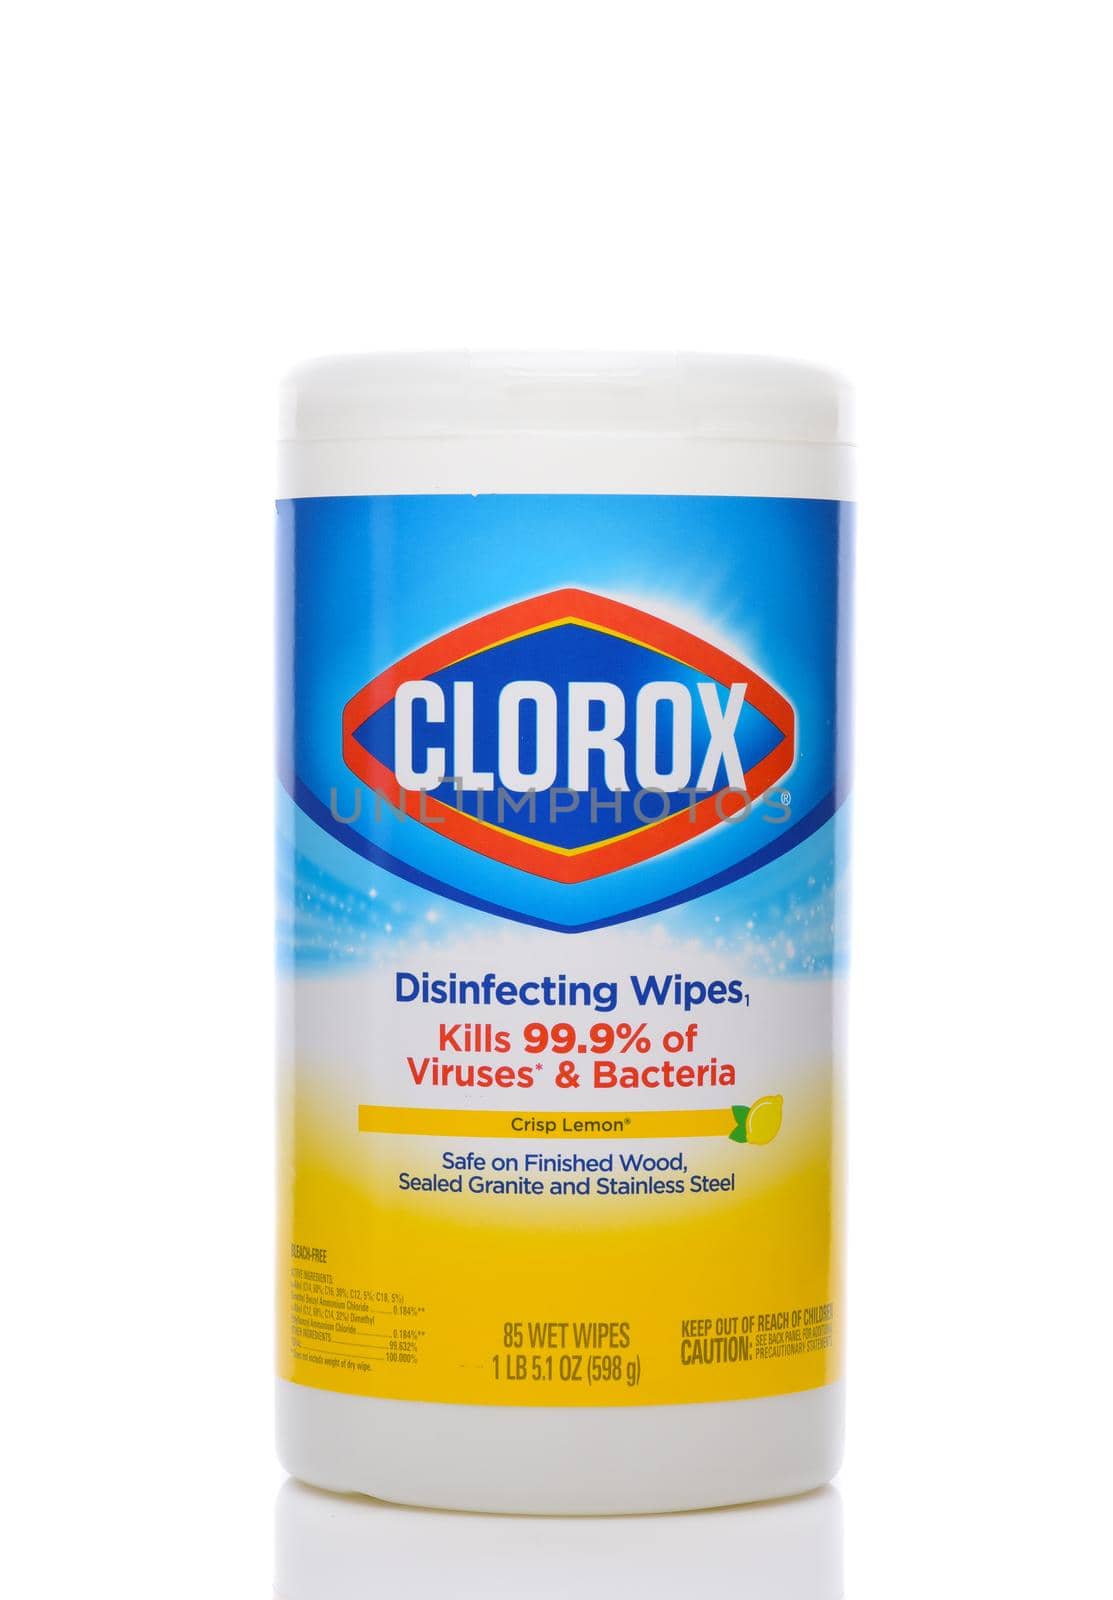 IRVINE, CALIFORNIA - 26 APRIL 2020:  A package of Clorox Disinfecting Wipes, Crisp Lemon Scent to kill Bacteria and Viruses.